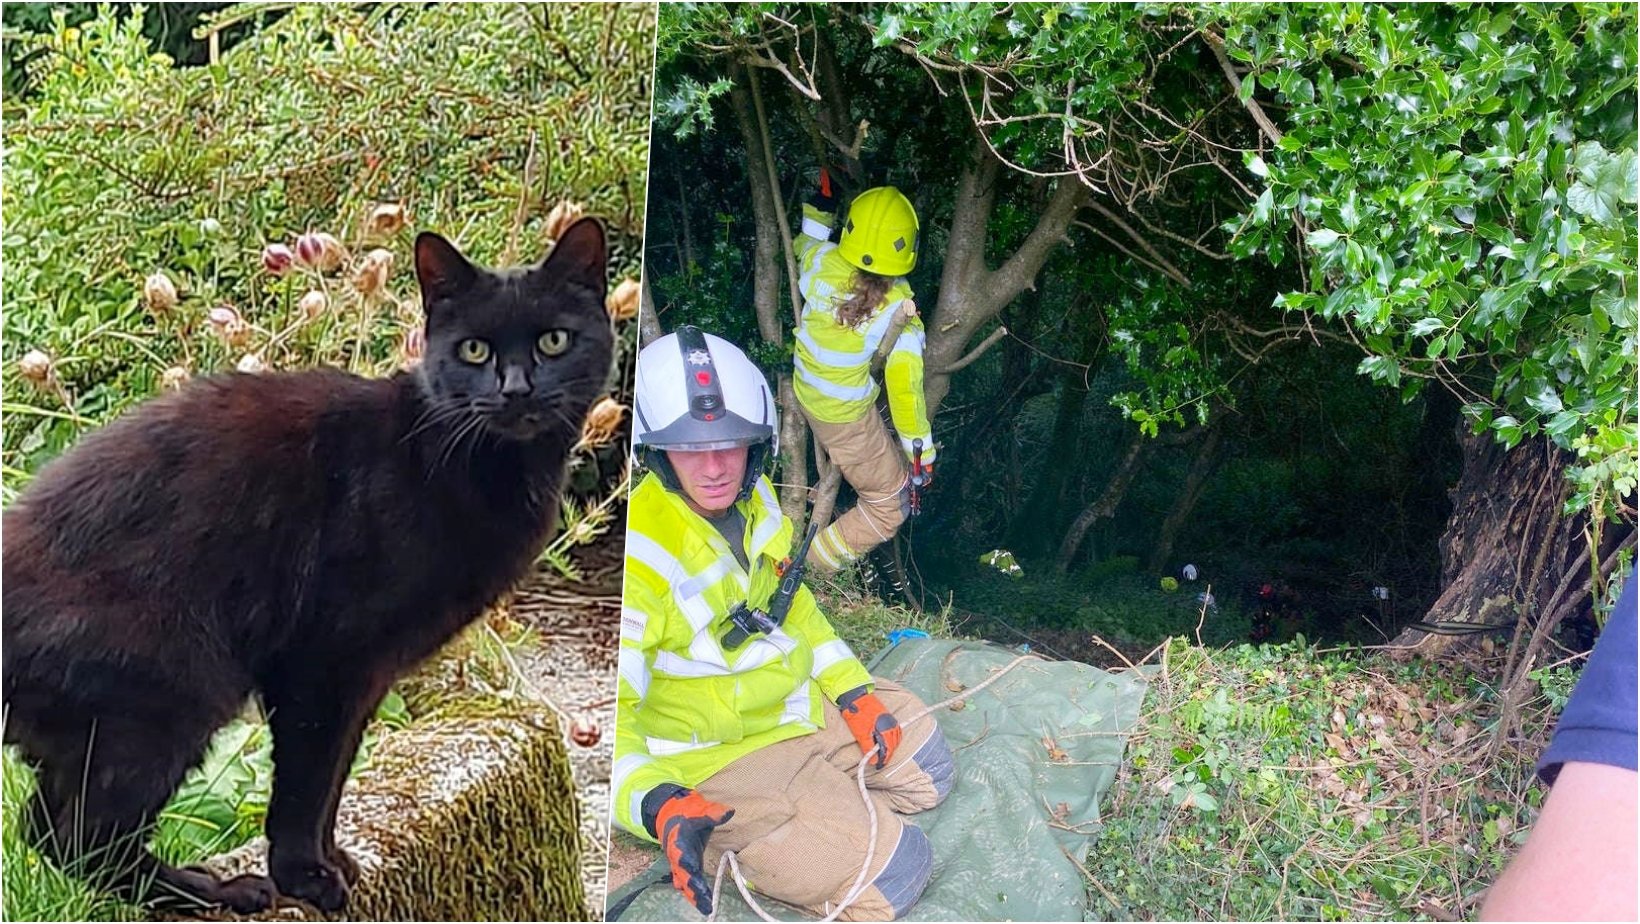 6 facebook cover 21.jpg?resize=412,232 - Elderly Woman Helplessly Fell Into A Valley, But Her CAT Came To Her Aid & Alerted The Neighbors To Locate Her